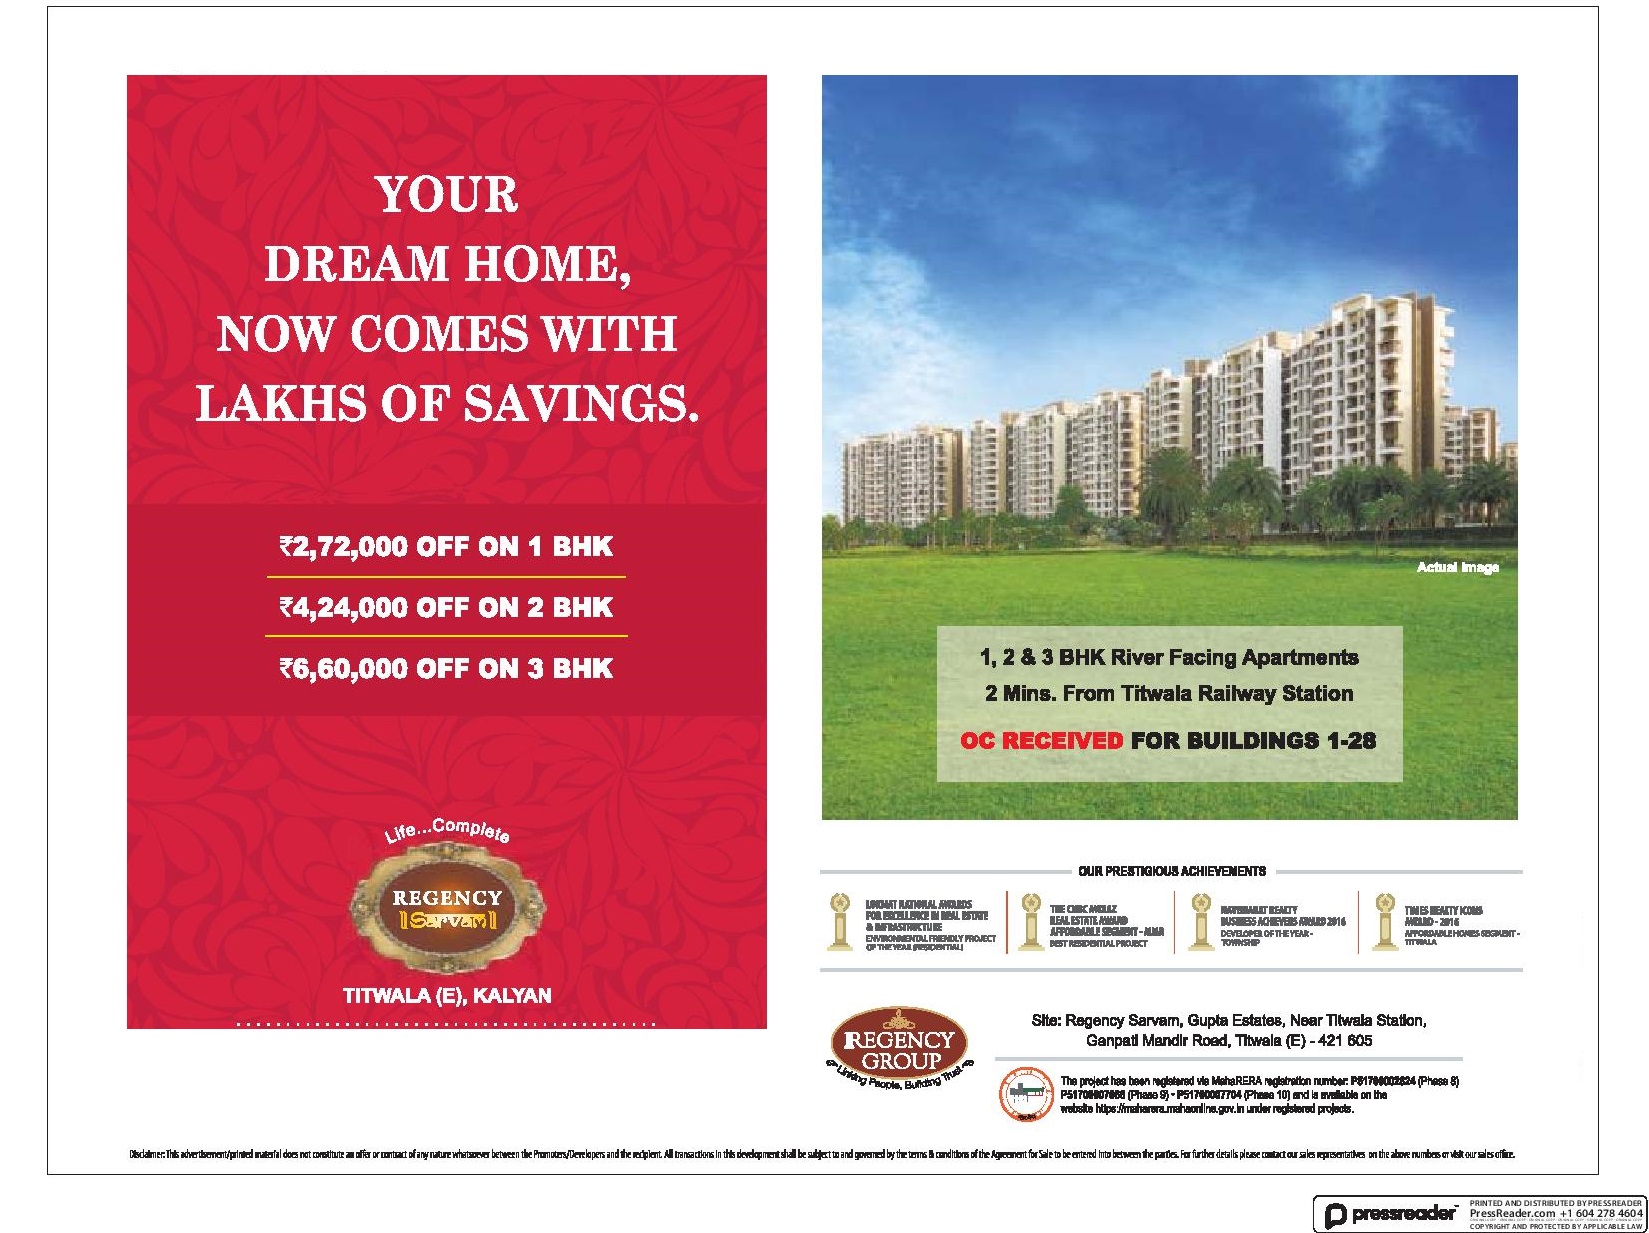 Save Lakhs of rupees by booking your dream home at Regency Sarvam in Mumbai